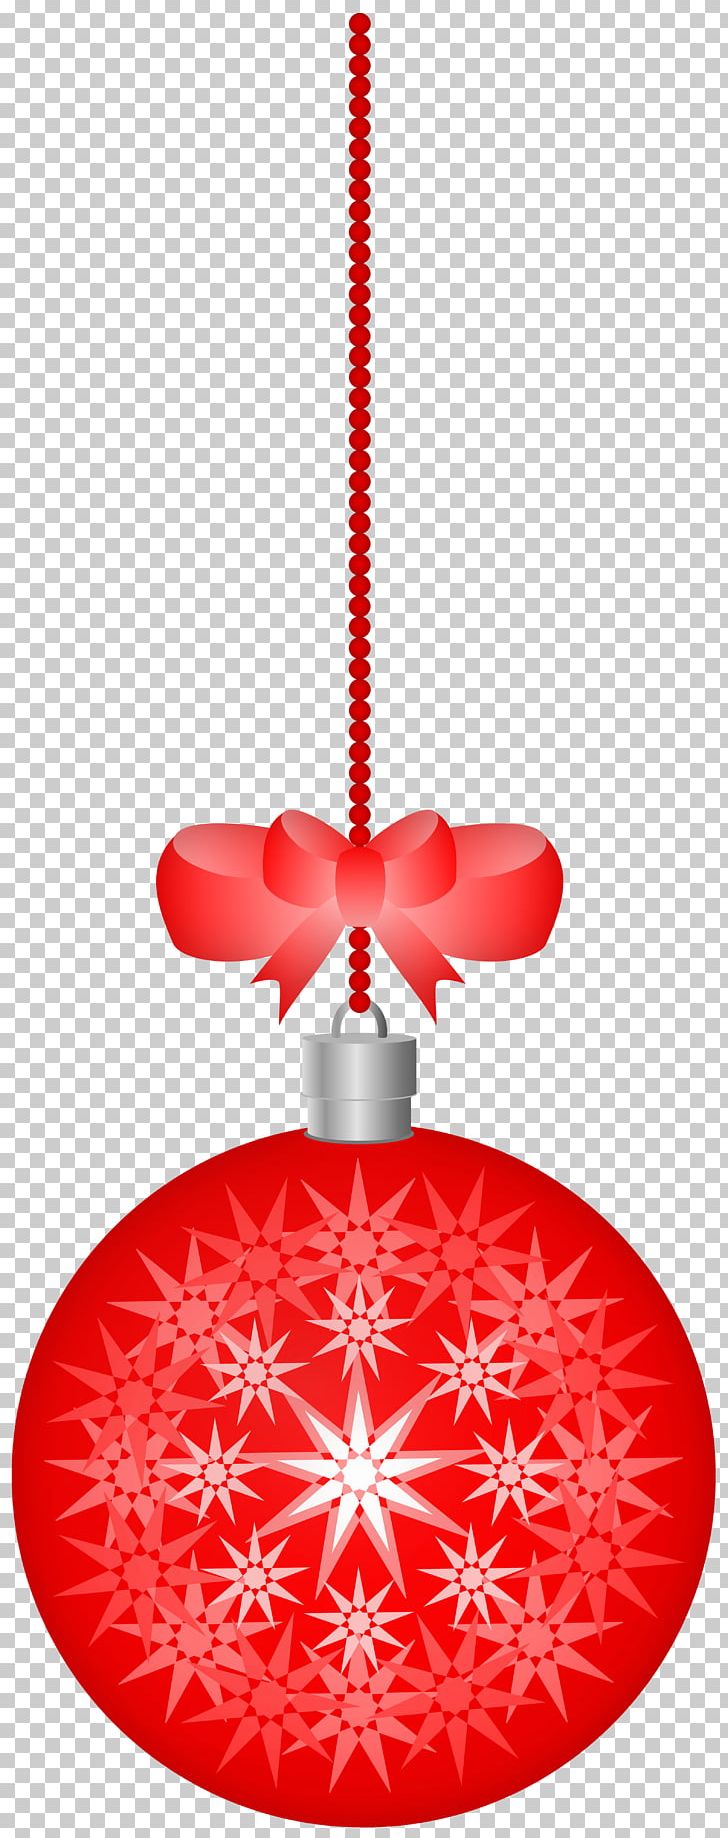 Christmas Ornament Red PNG, Clipart, Ball, Christmas, Christmas Ball, Christmas Decoration, Christmas Ornament Free PNG Download